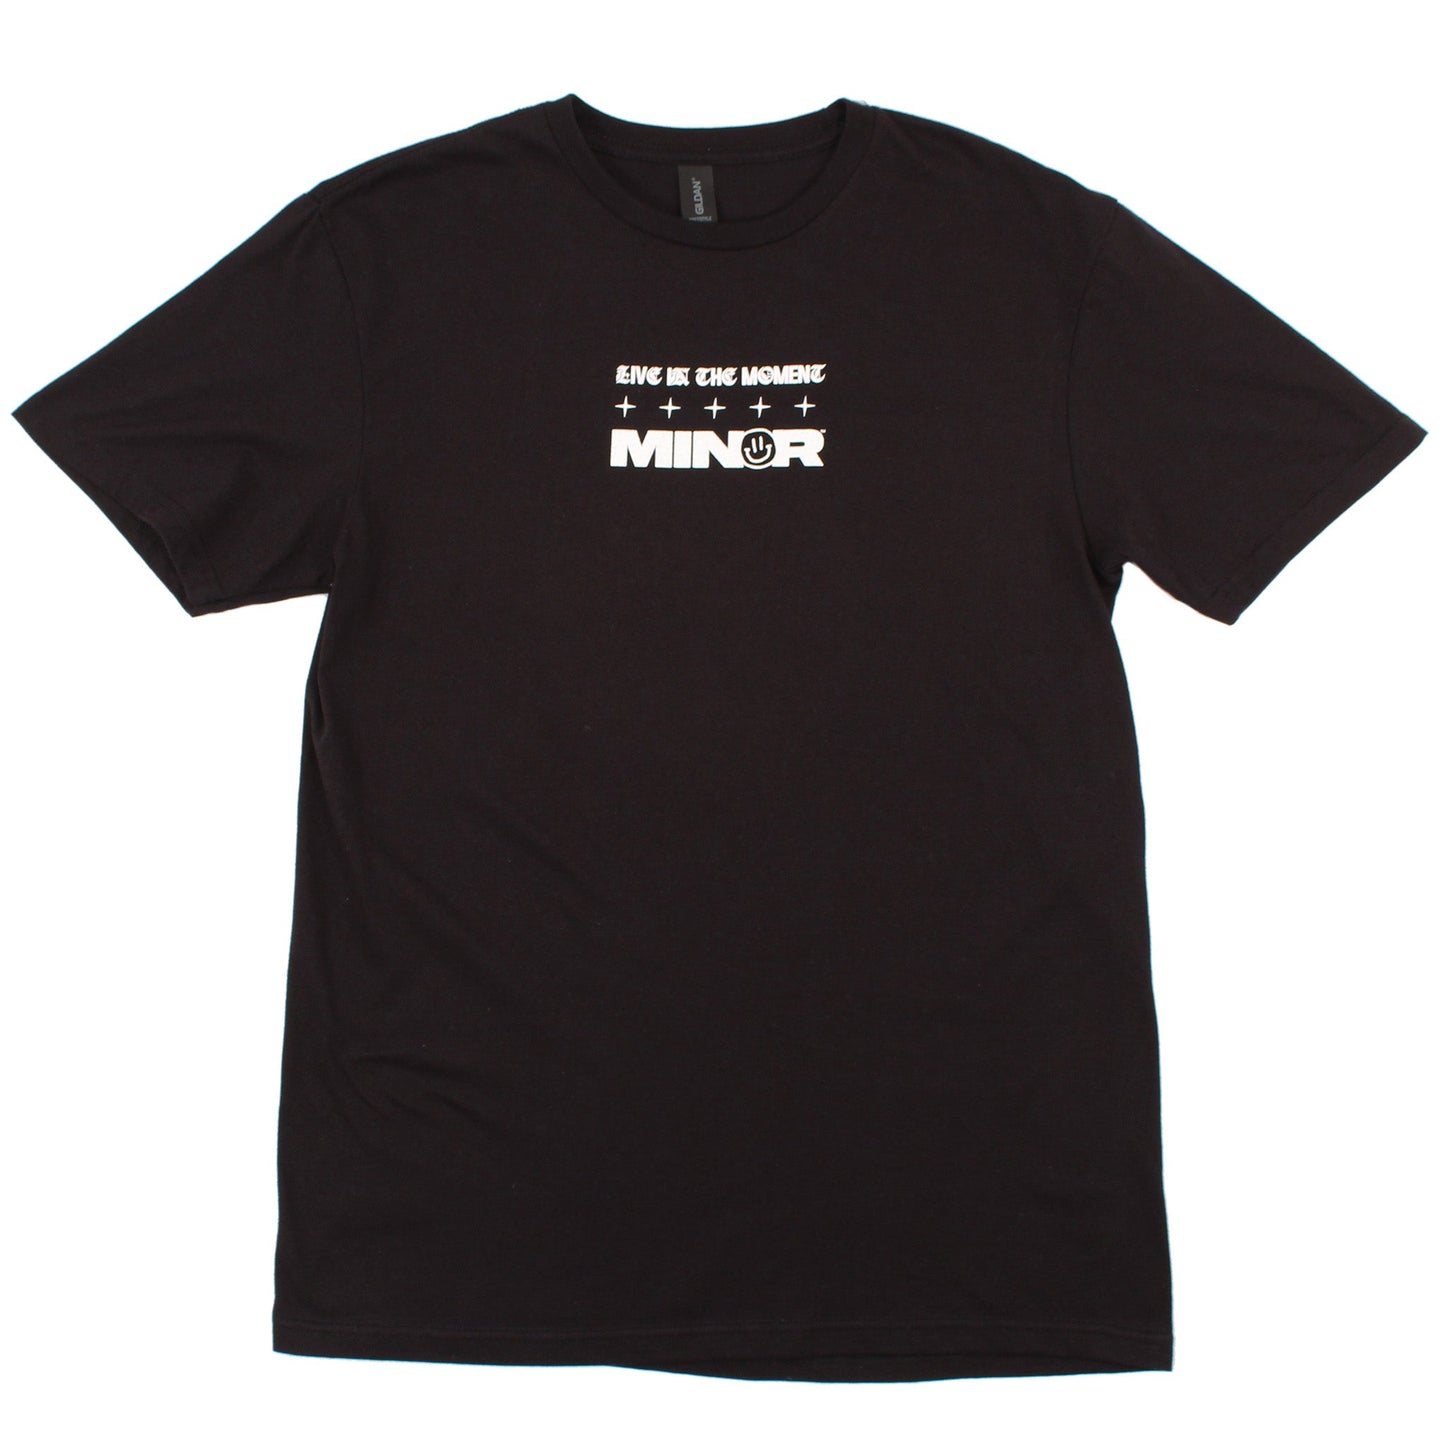 Live In The Moment Tee (Black)